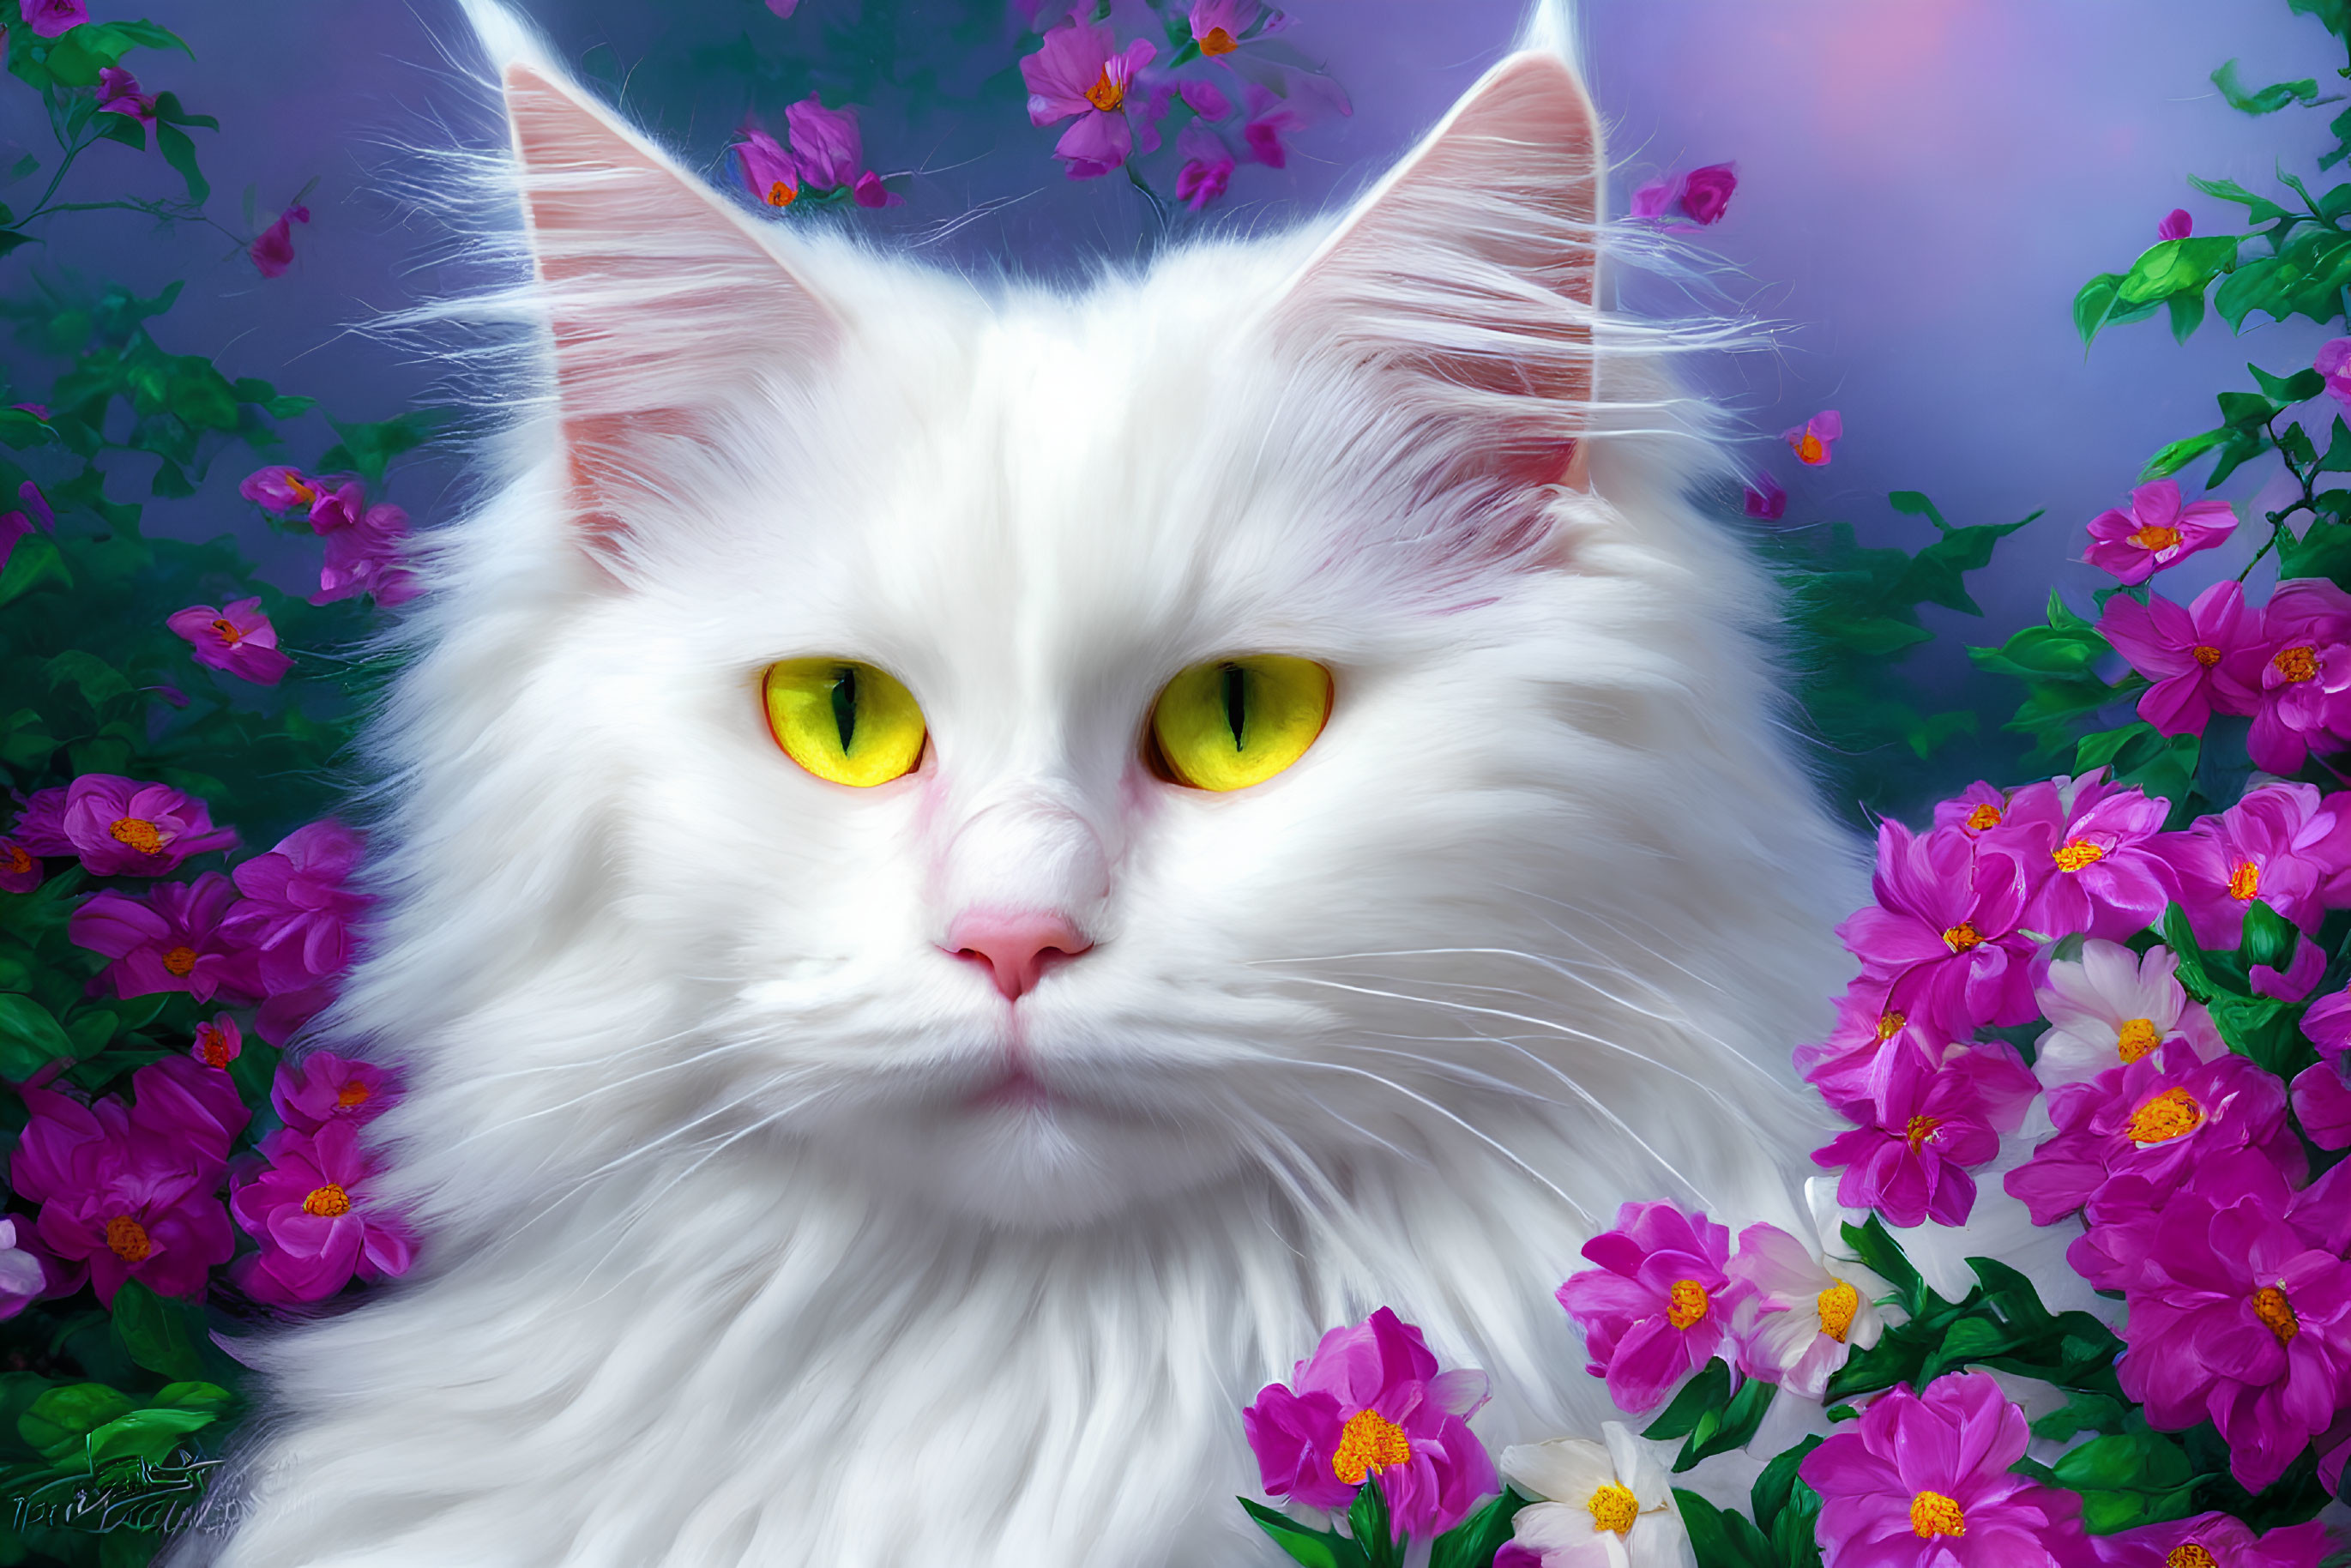 White Cat with Yellow Eyes Surrounded by Pink Flowers on Blue Background